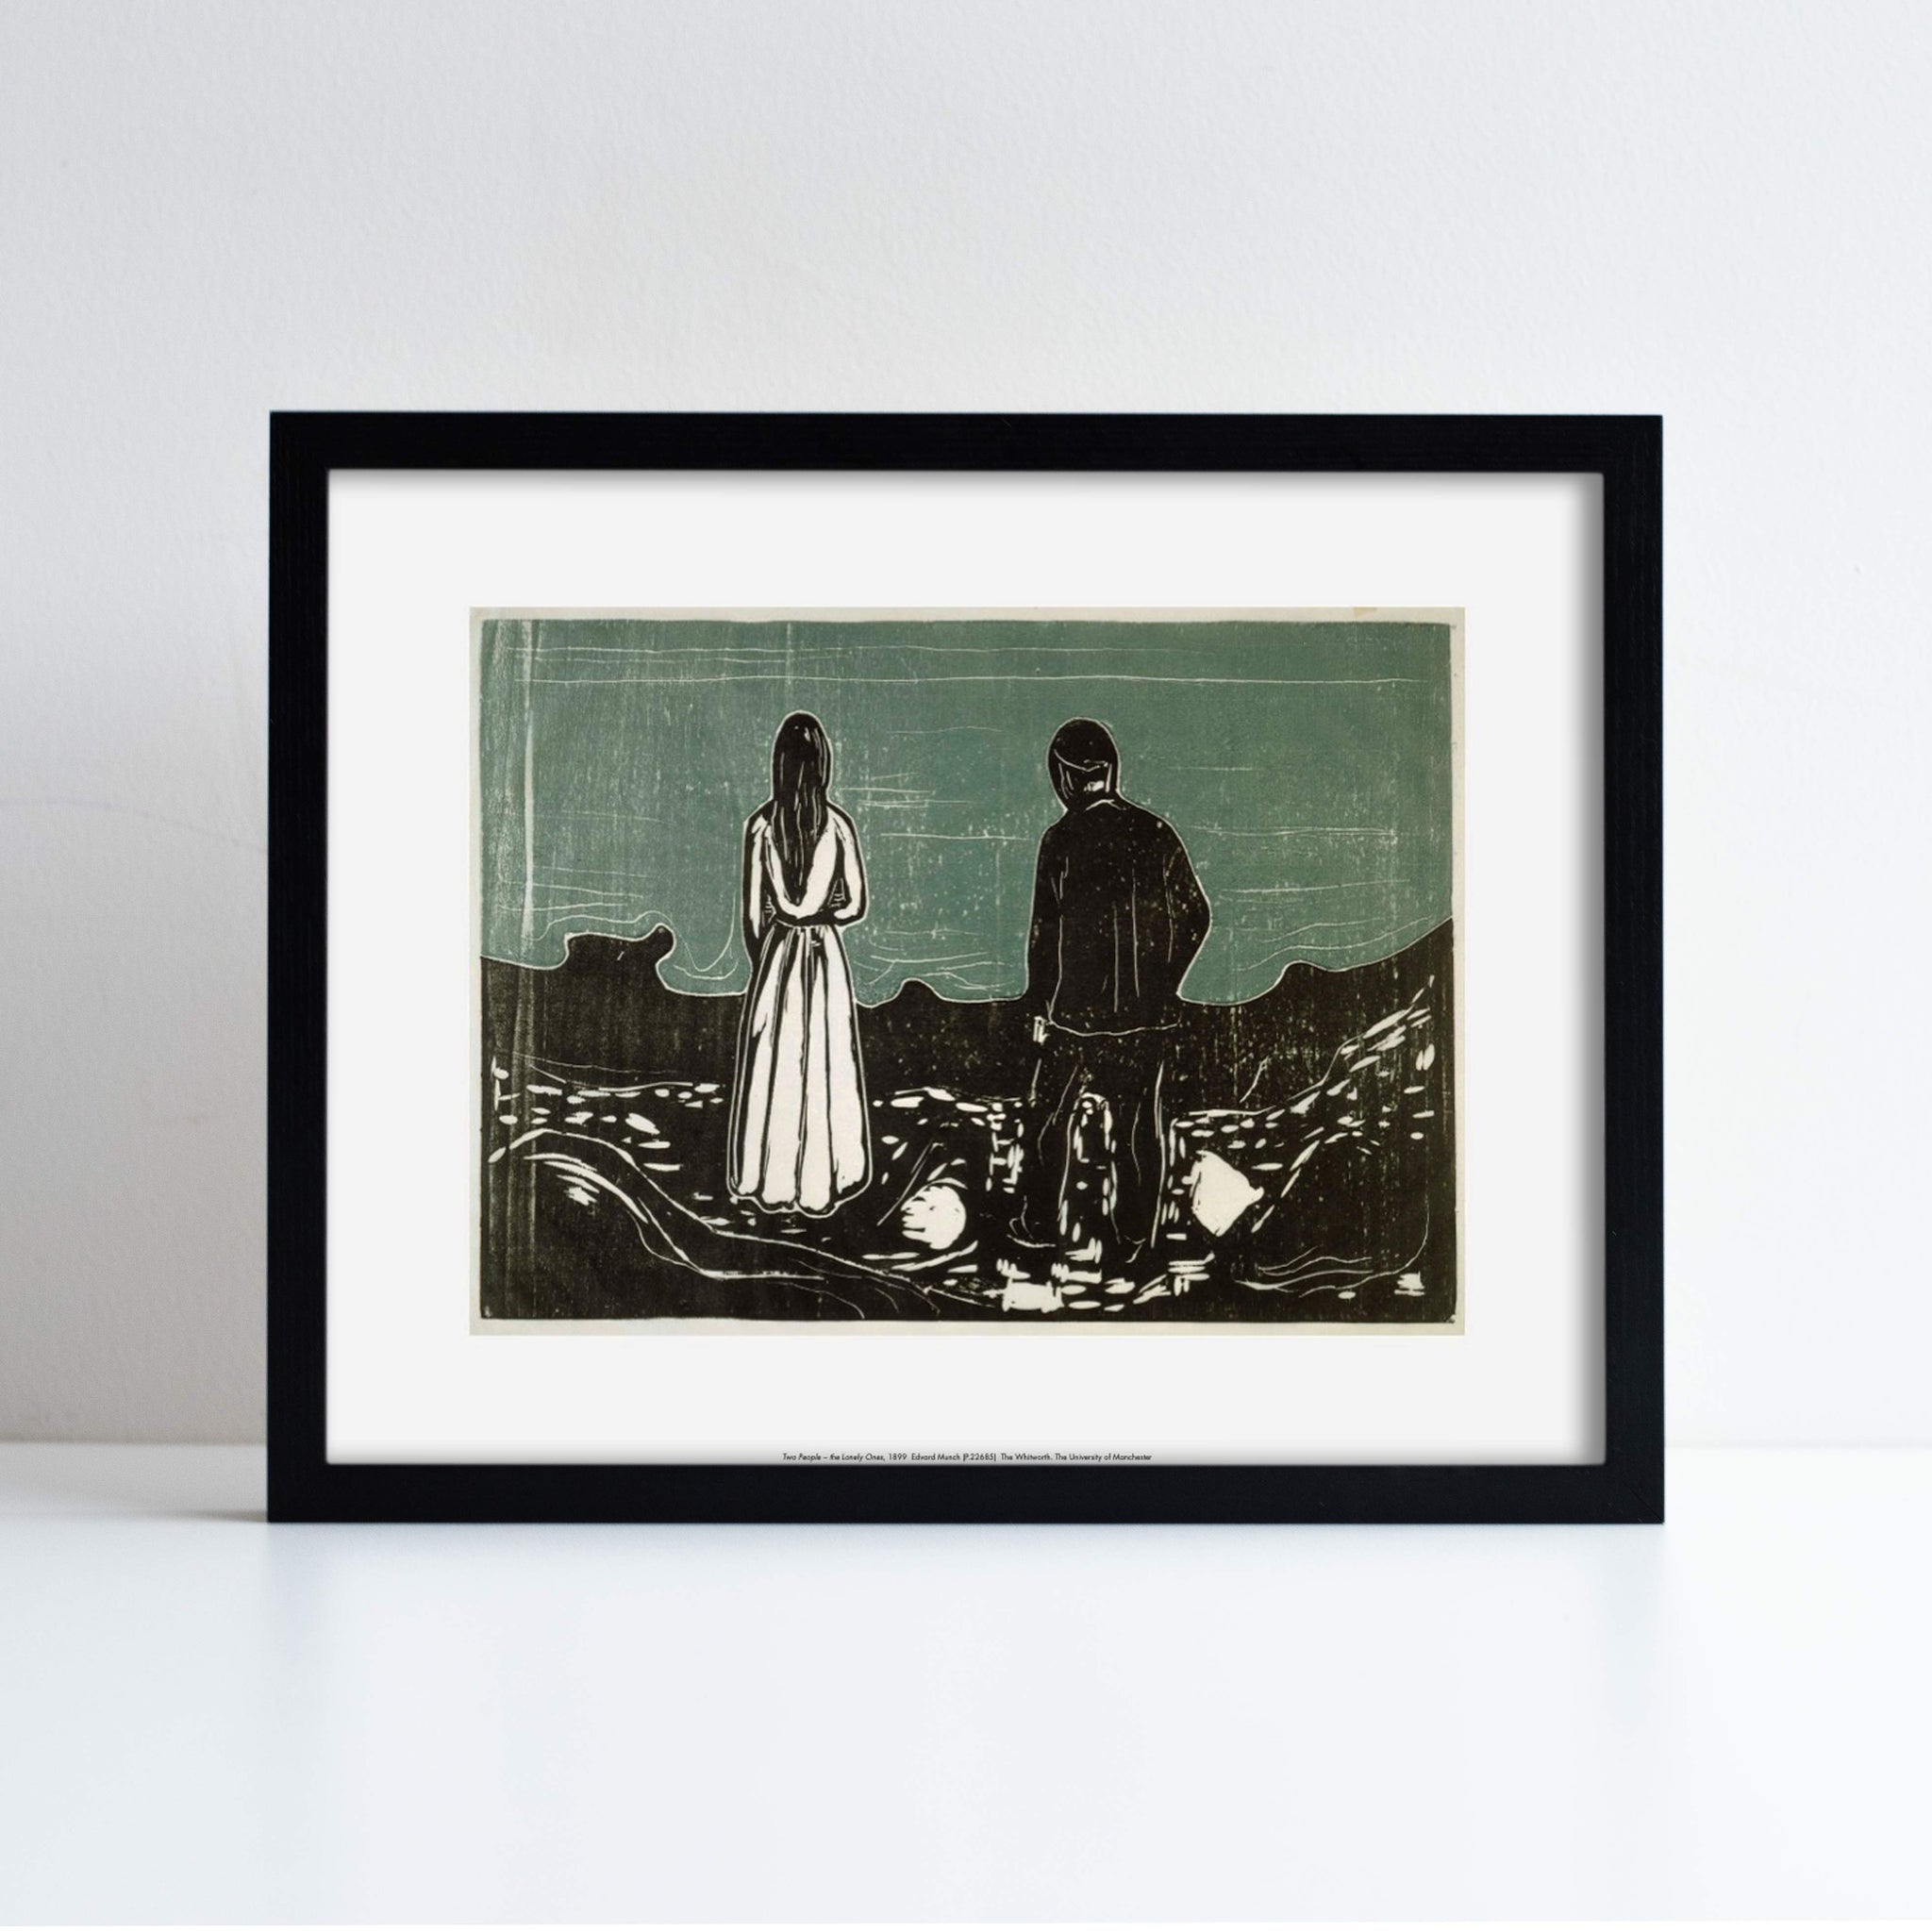 Reproduction of Edvard Munch's Two People The Lonely Ones, photographed in a black frame against a white background